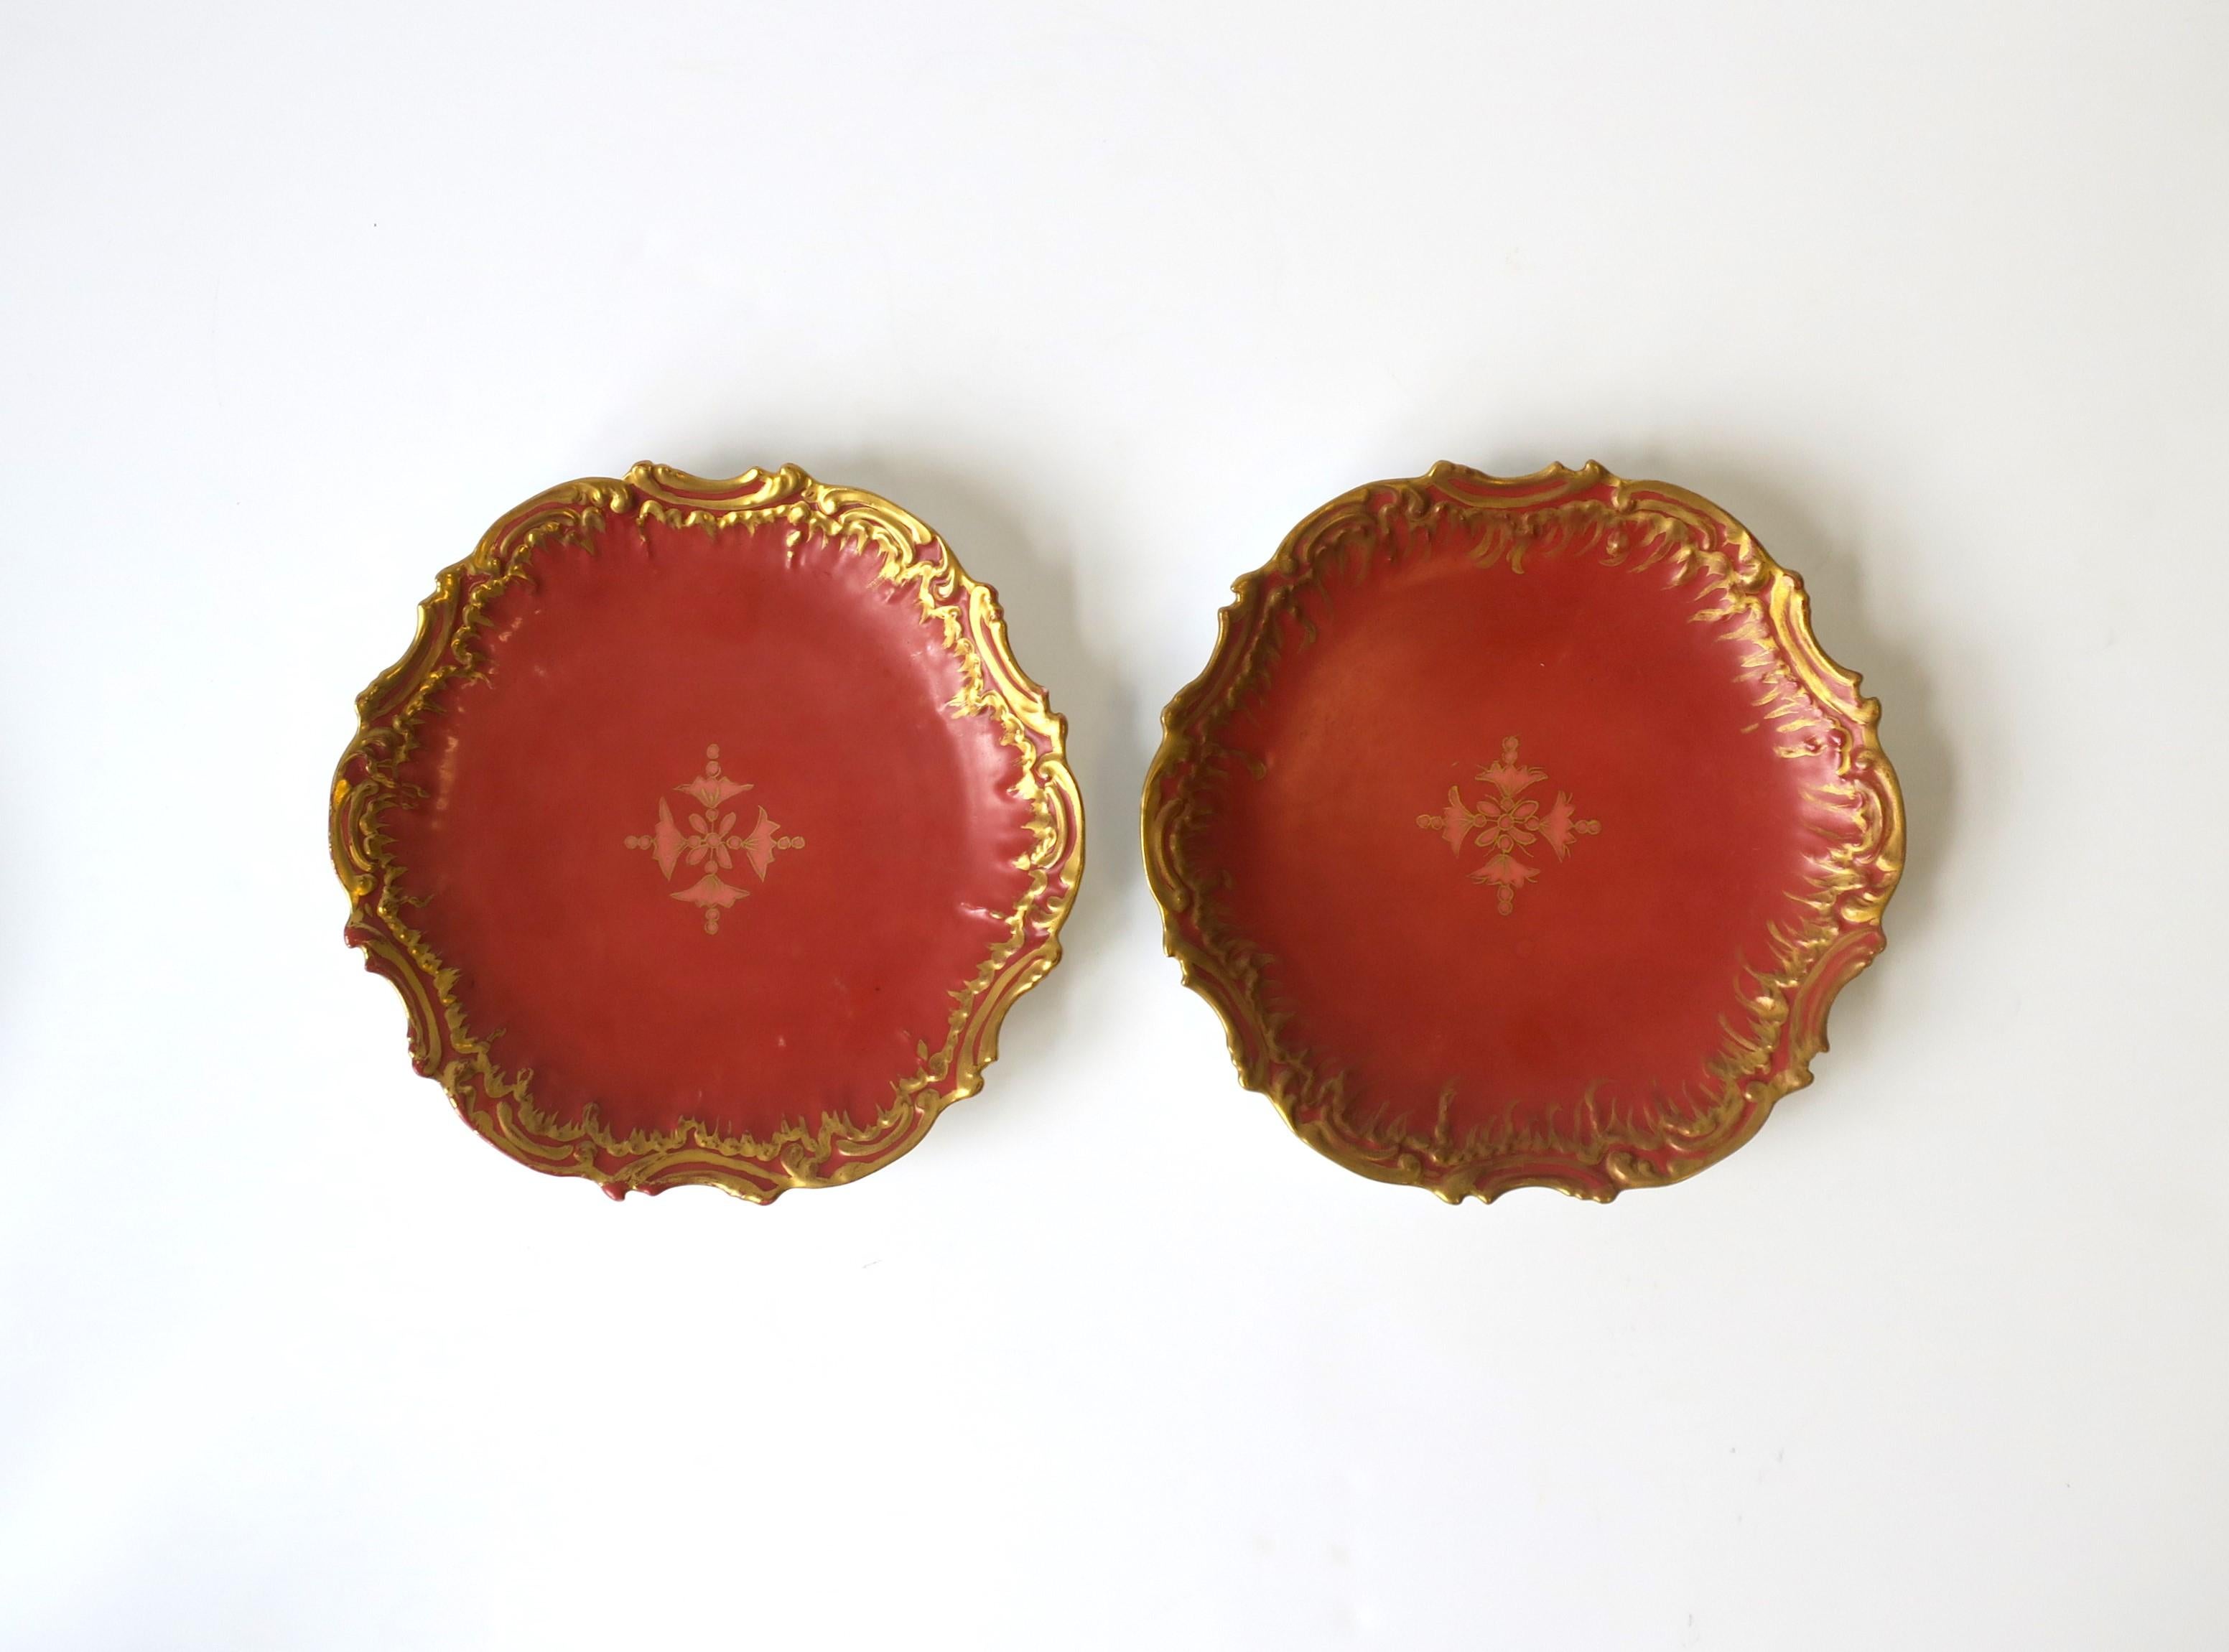 Antique French Limoges Porcelain Plates, Pair In Good Condition For Sale In New York, NY